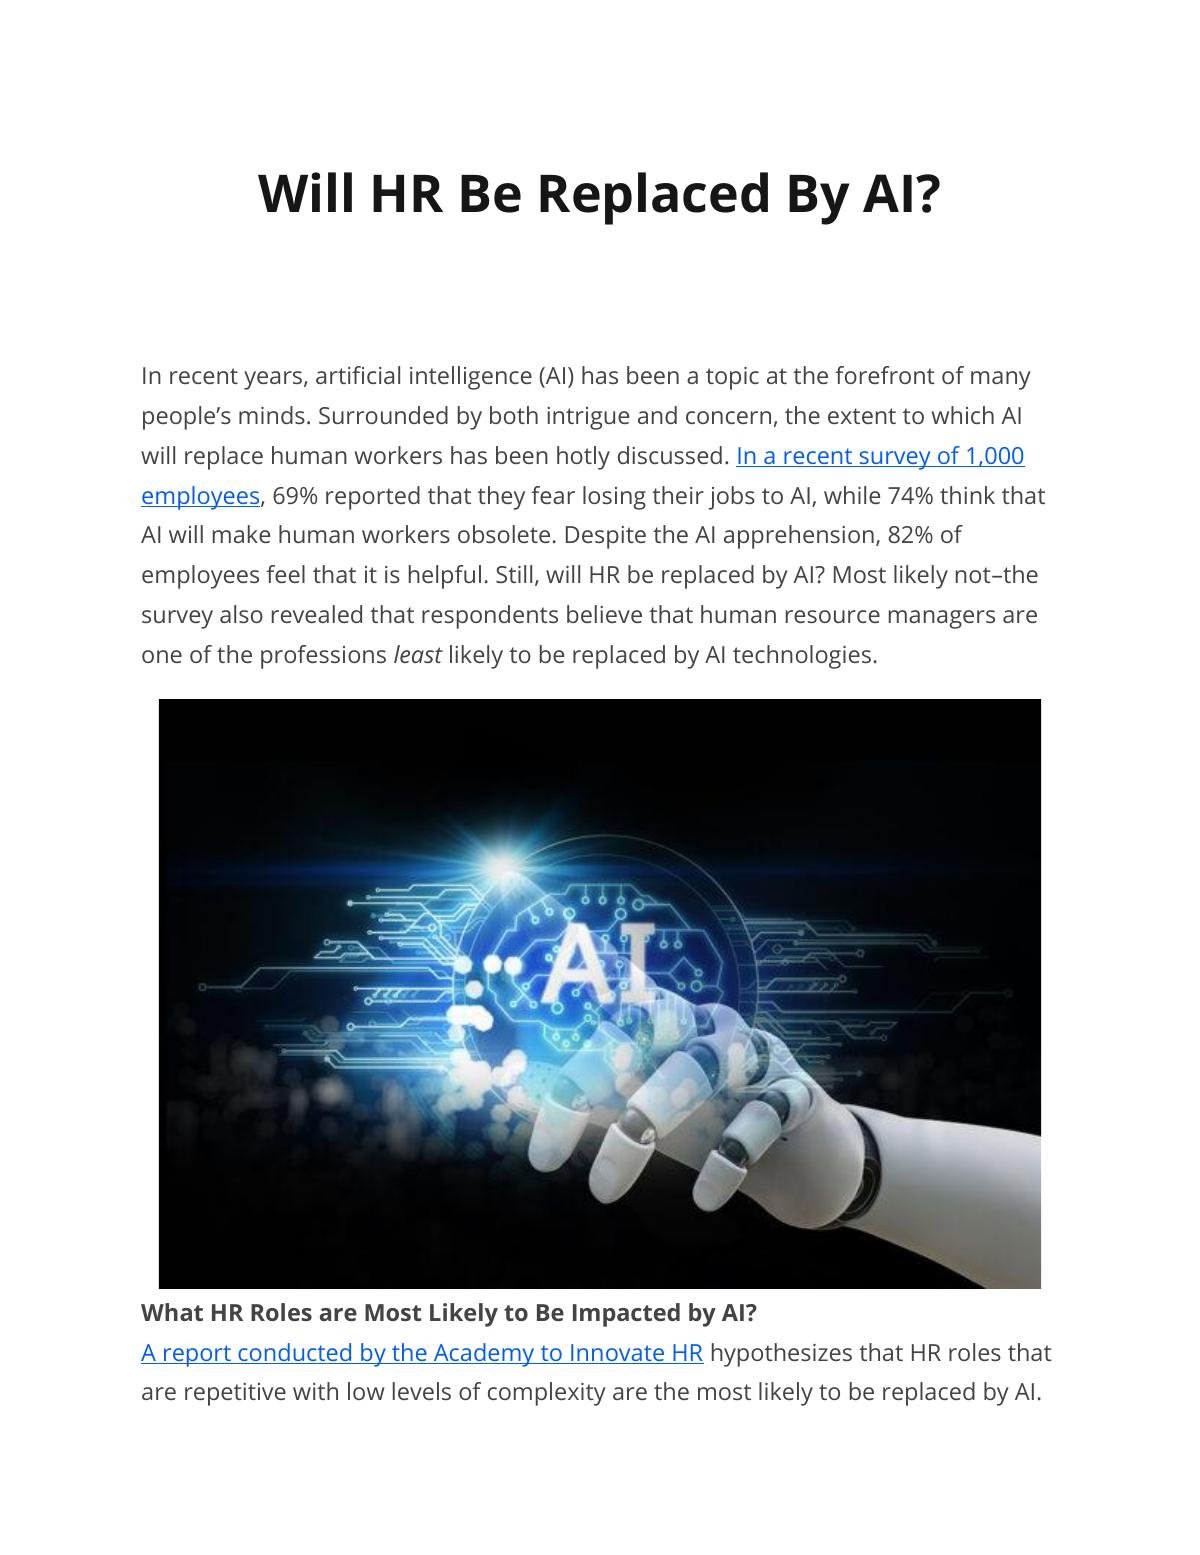 Will HR Be Replaced By AI?